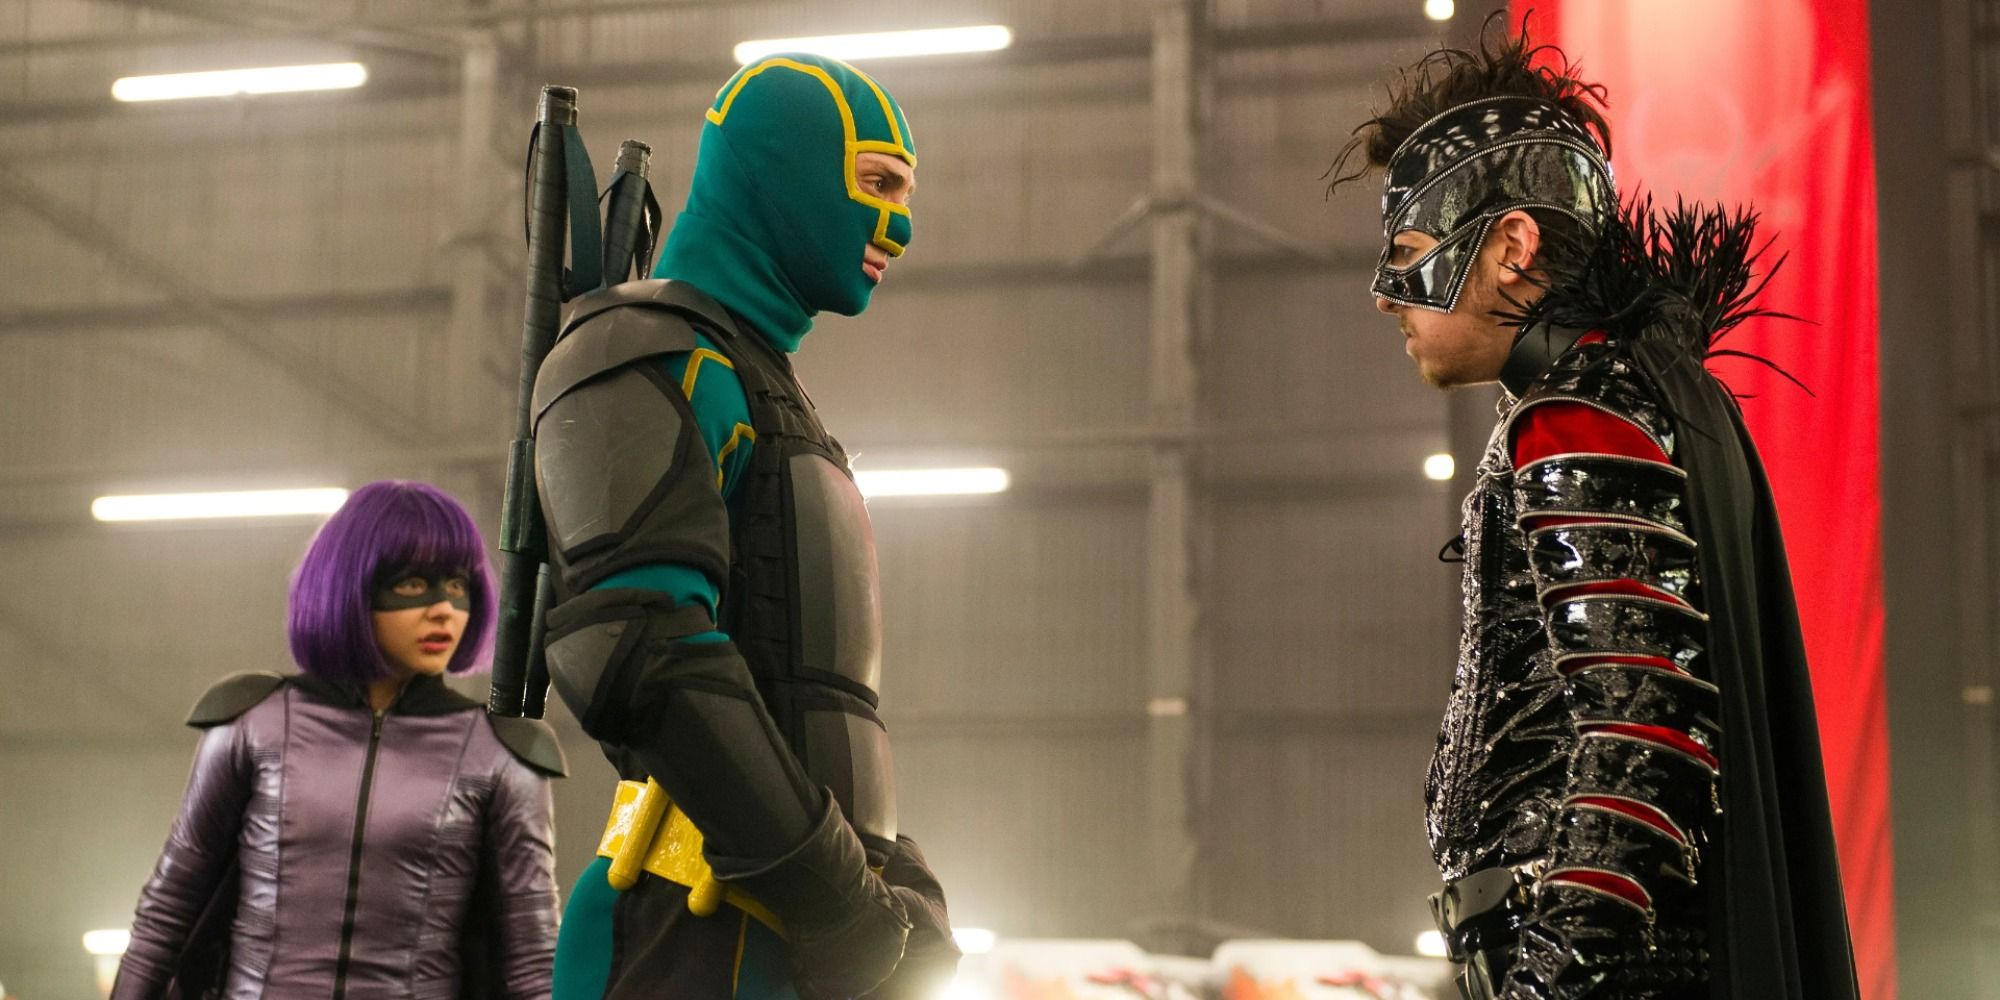 Hit-Girl, Kick-Ass, and Chris D'Amico staring at each other 